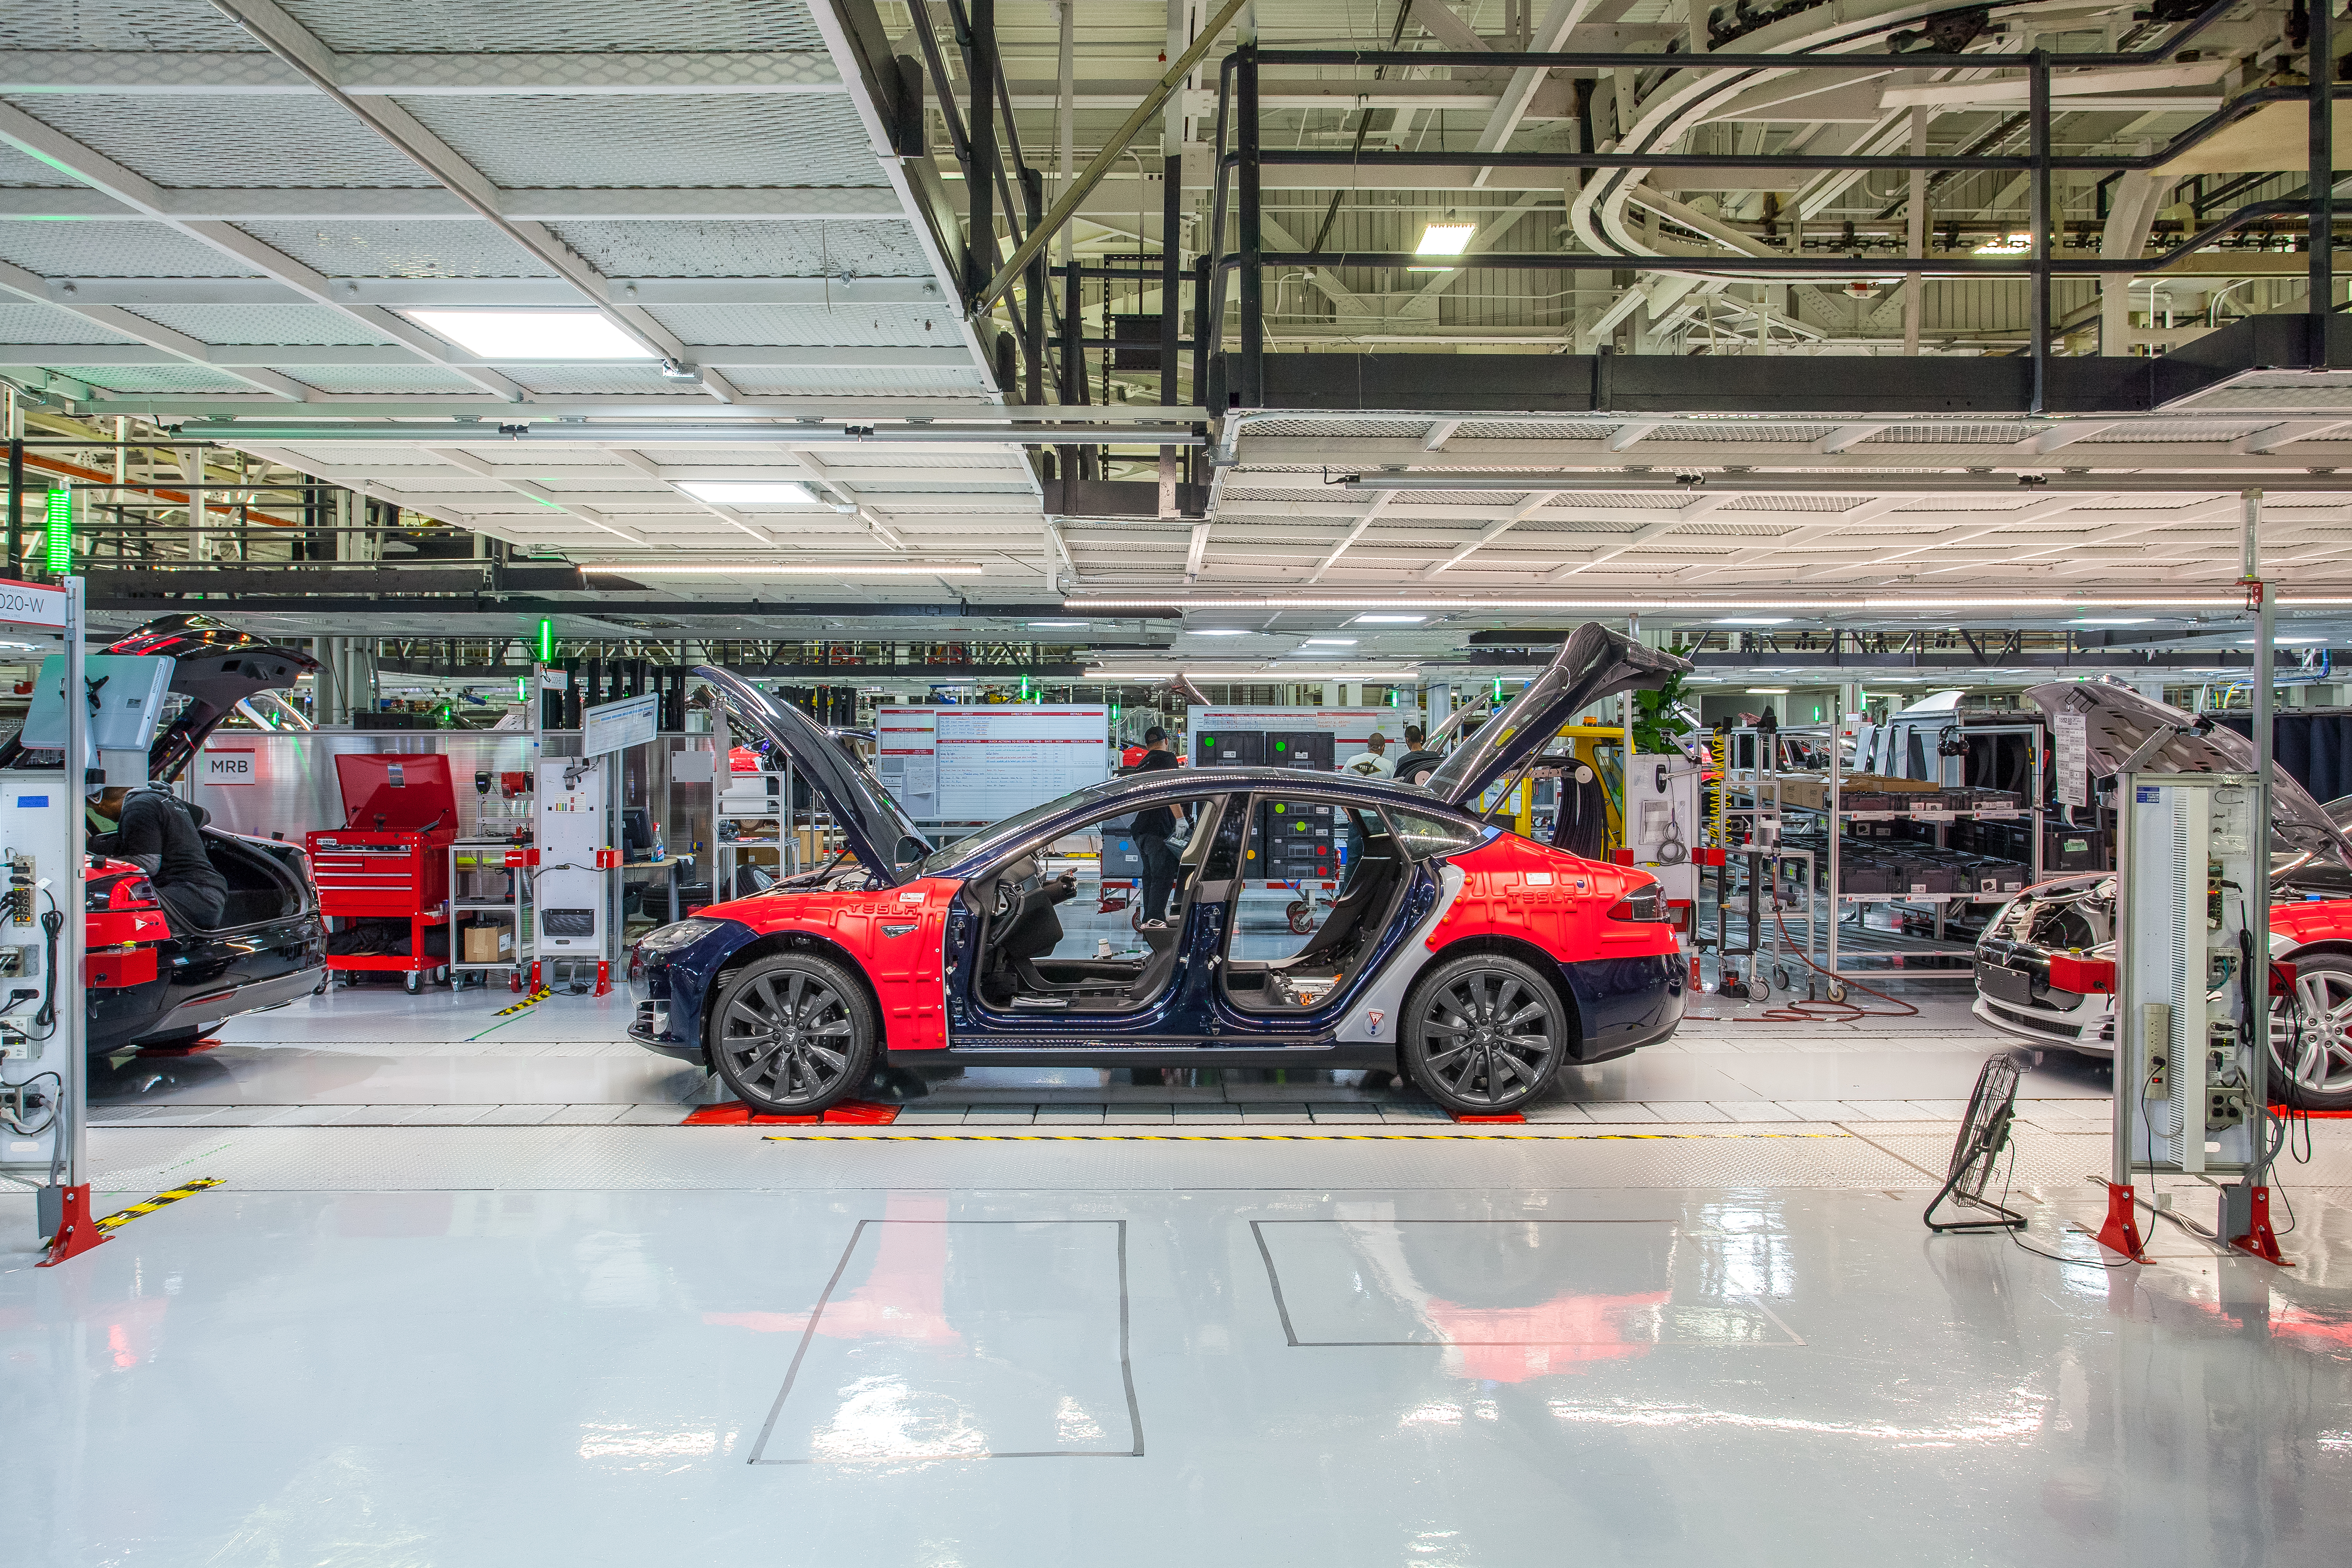 Elon Musk just put a new person in charge of production at Tesla’s Fremont factory